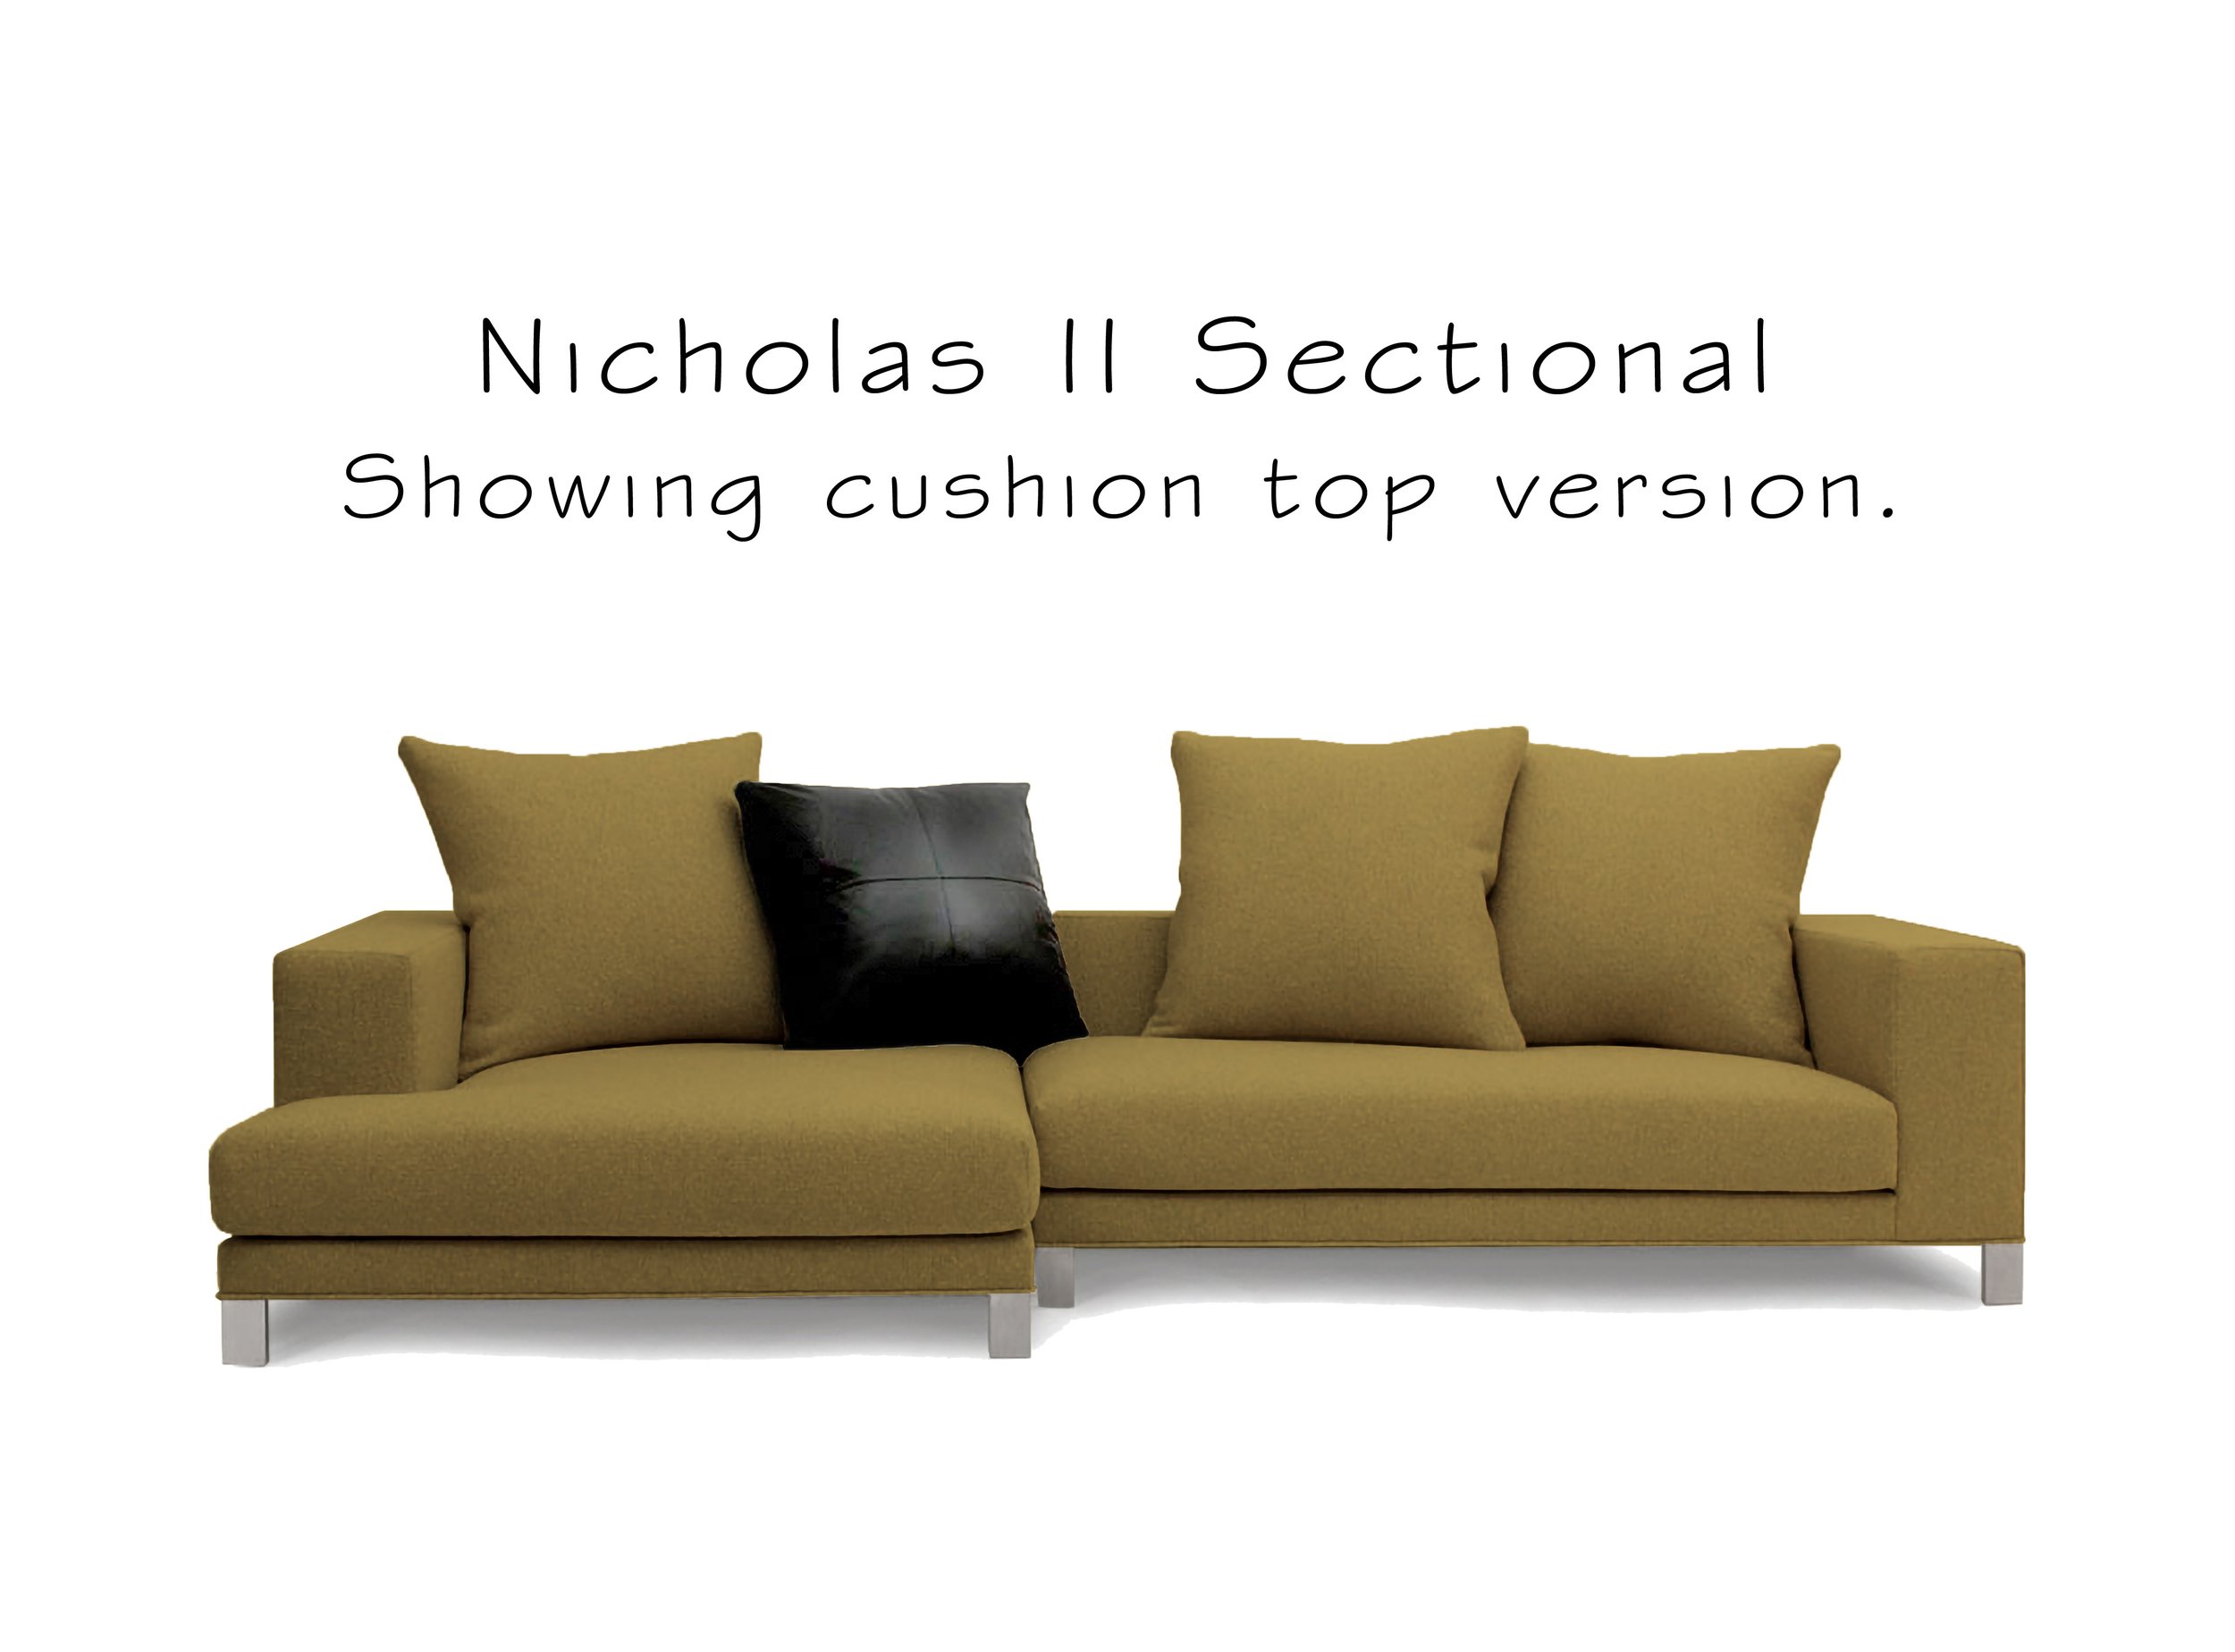 Nicholas II Sectional Front View WORDS.jpg